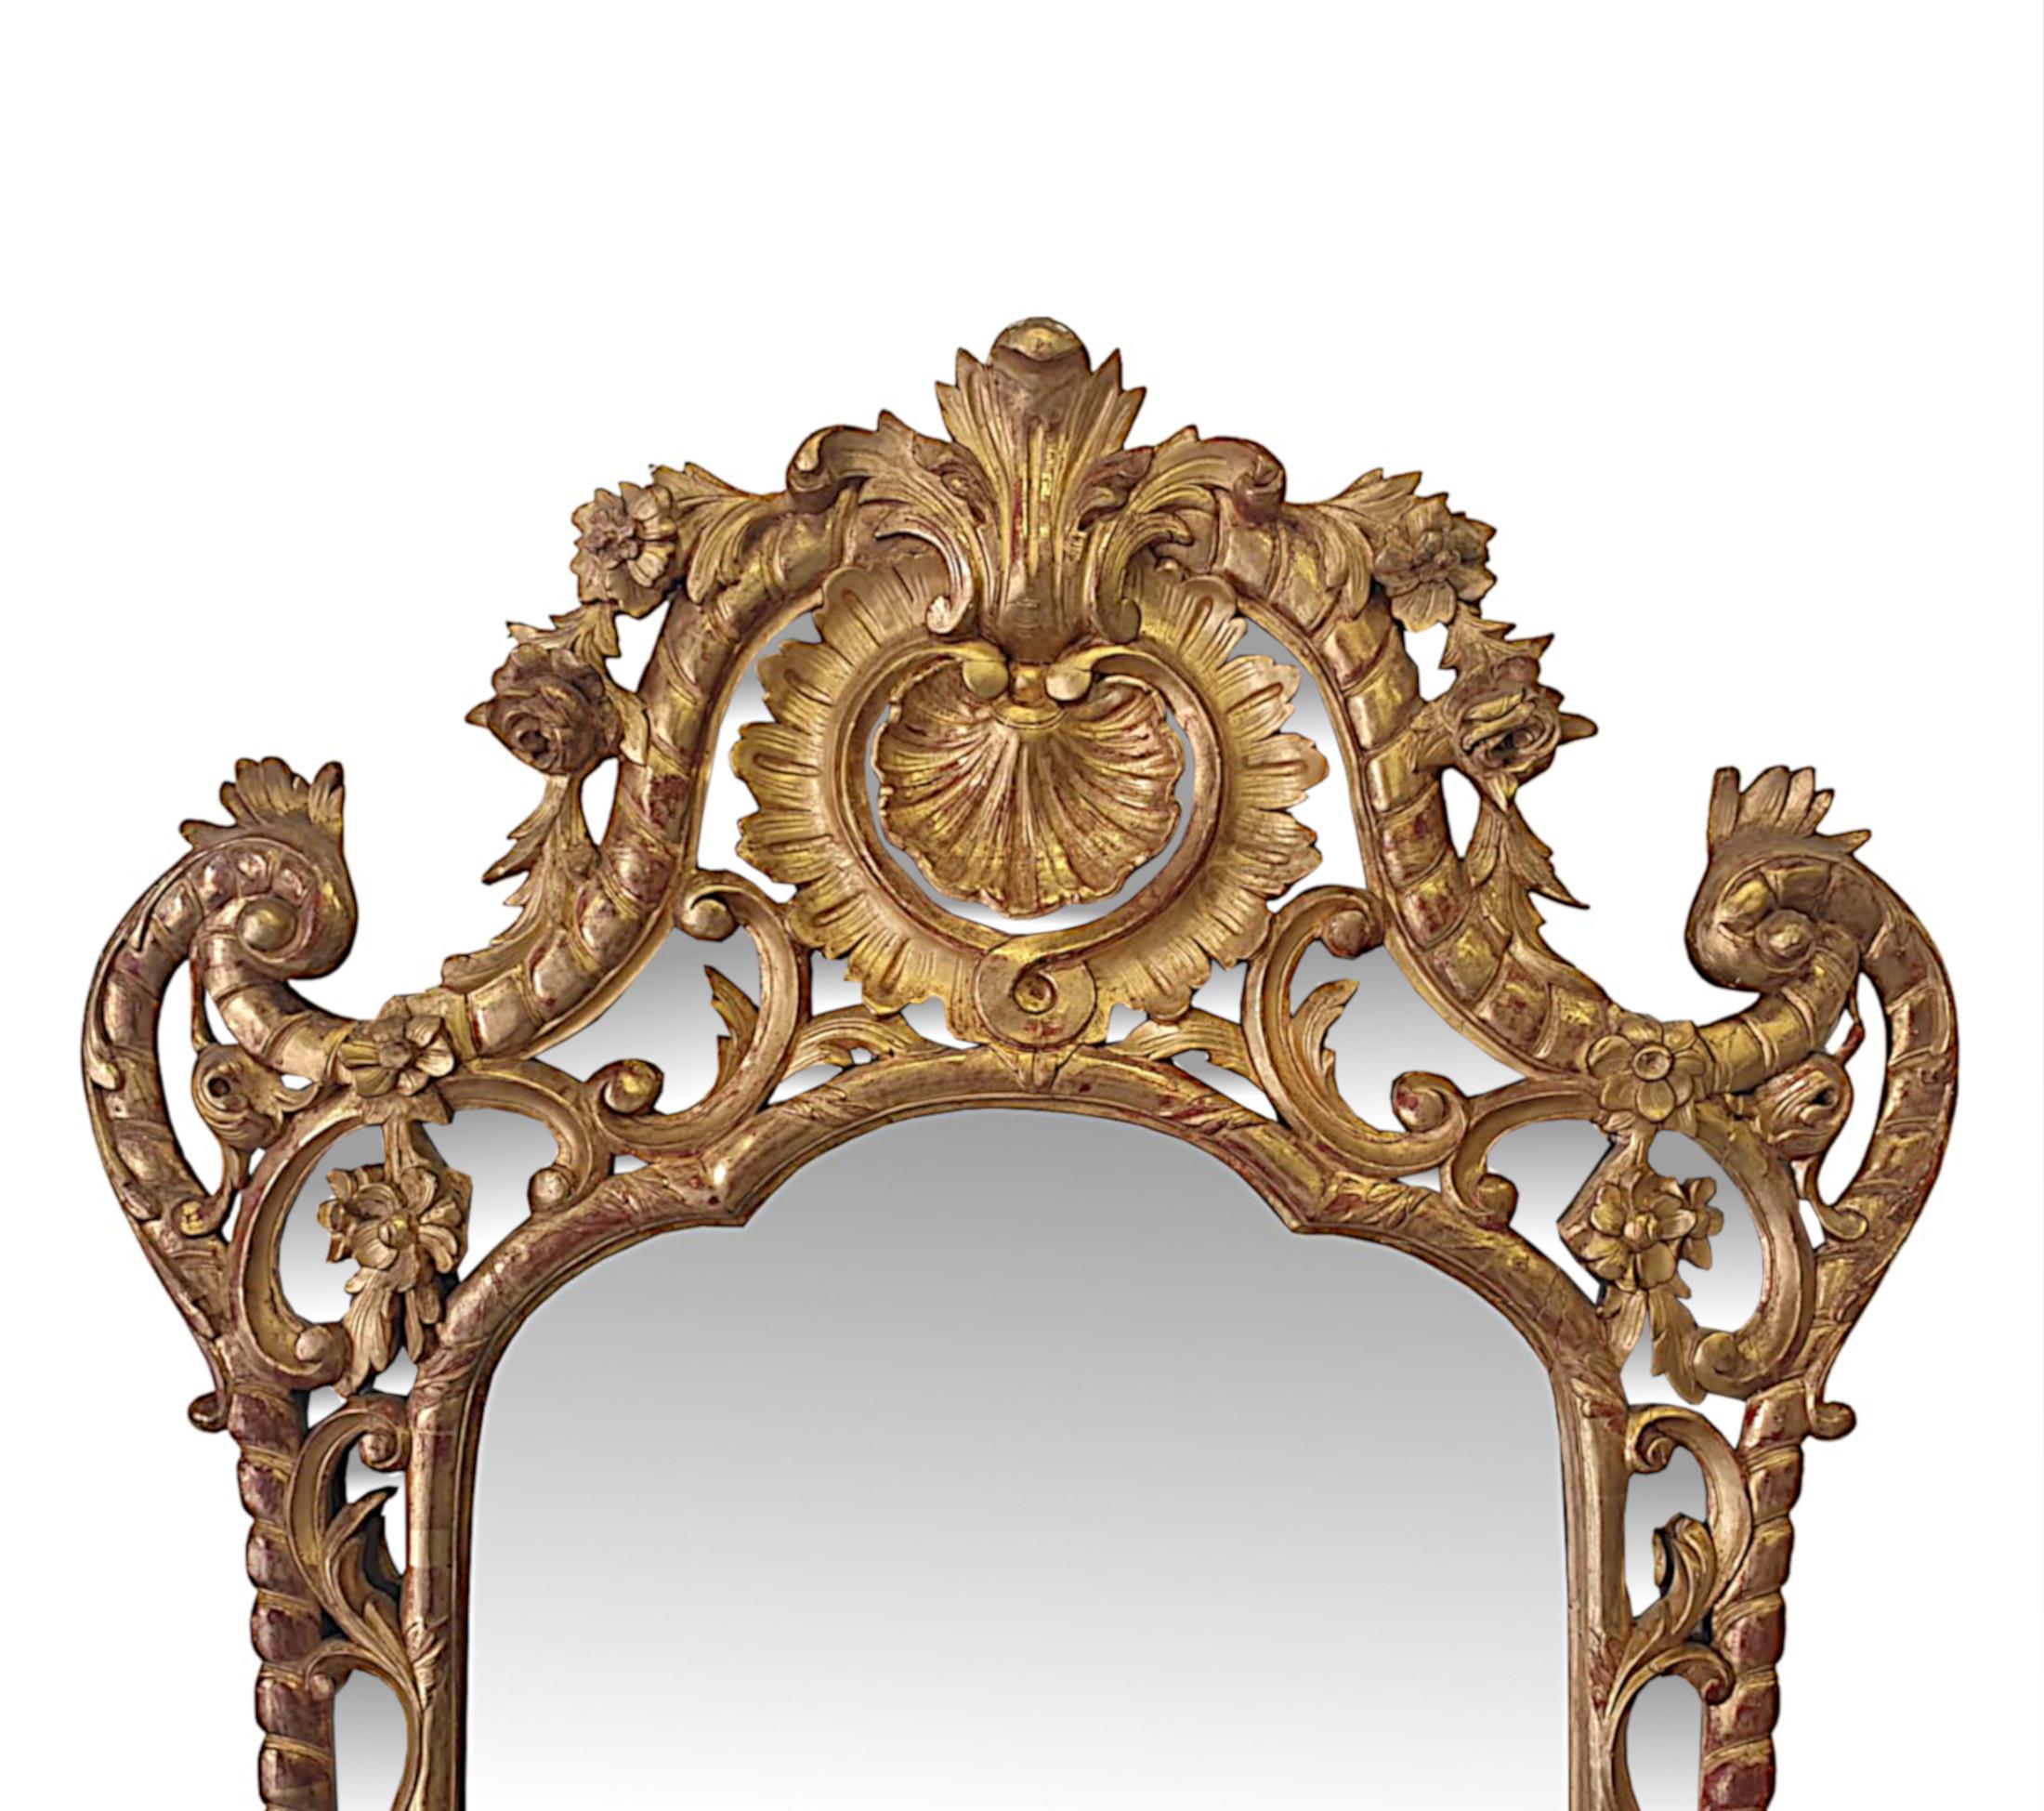 A rare and exceptional early 19th century giltwood overmantle mirror of impressive proportions. The original bevelled and shaped mirror glass plate set within a finely hand carved moulded and pierced giltwood frame with additional mirror glass plate